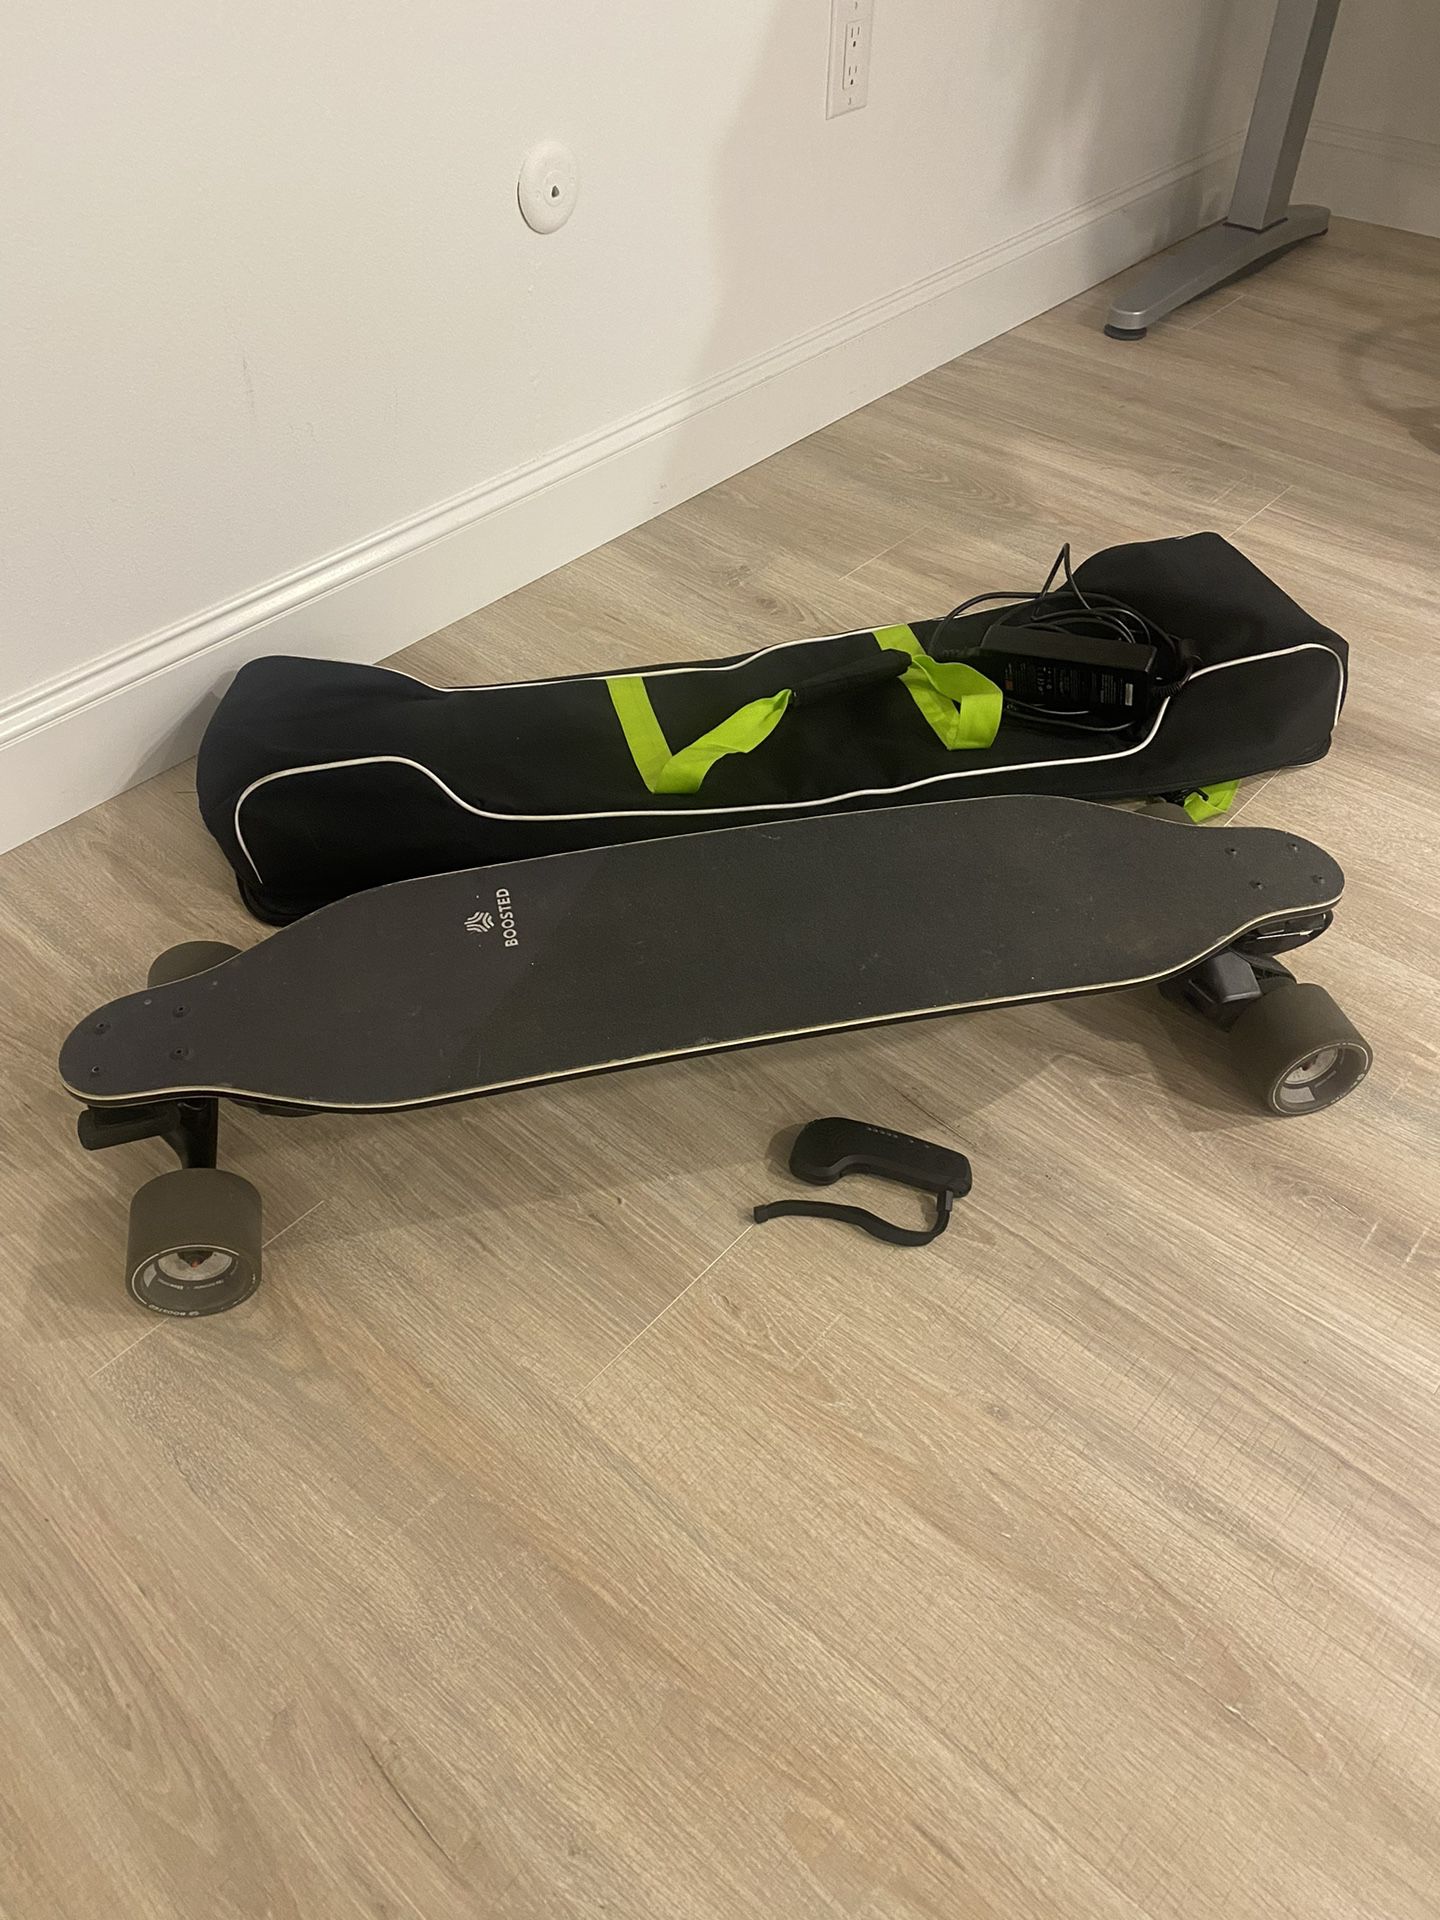 Boosted Stealth E-Skate Longboard with Very Low Miles